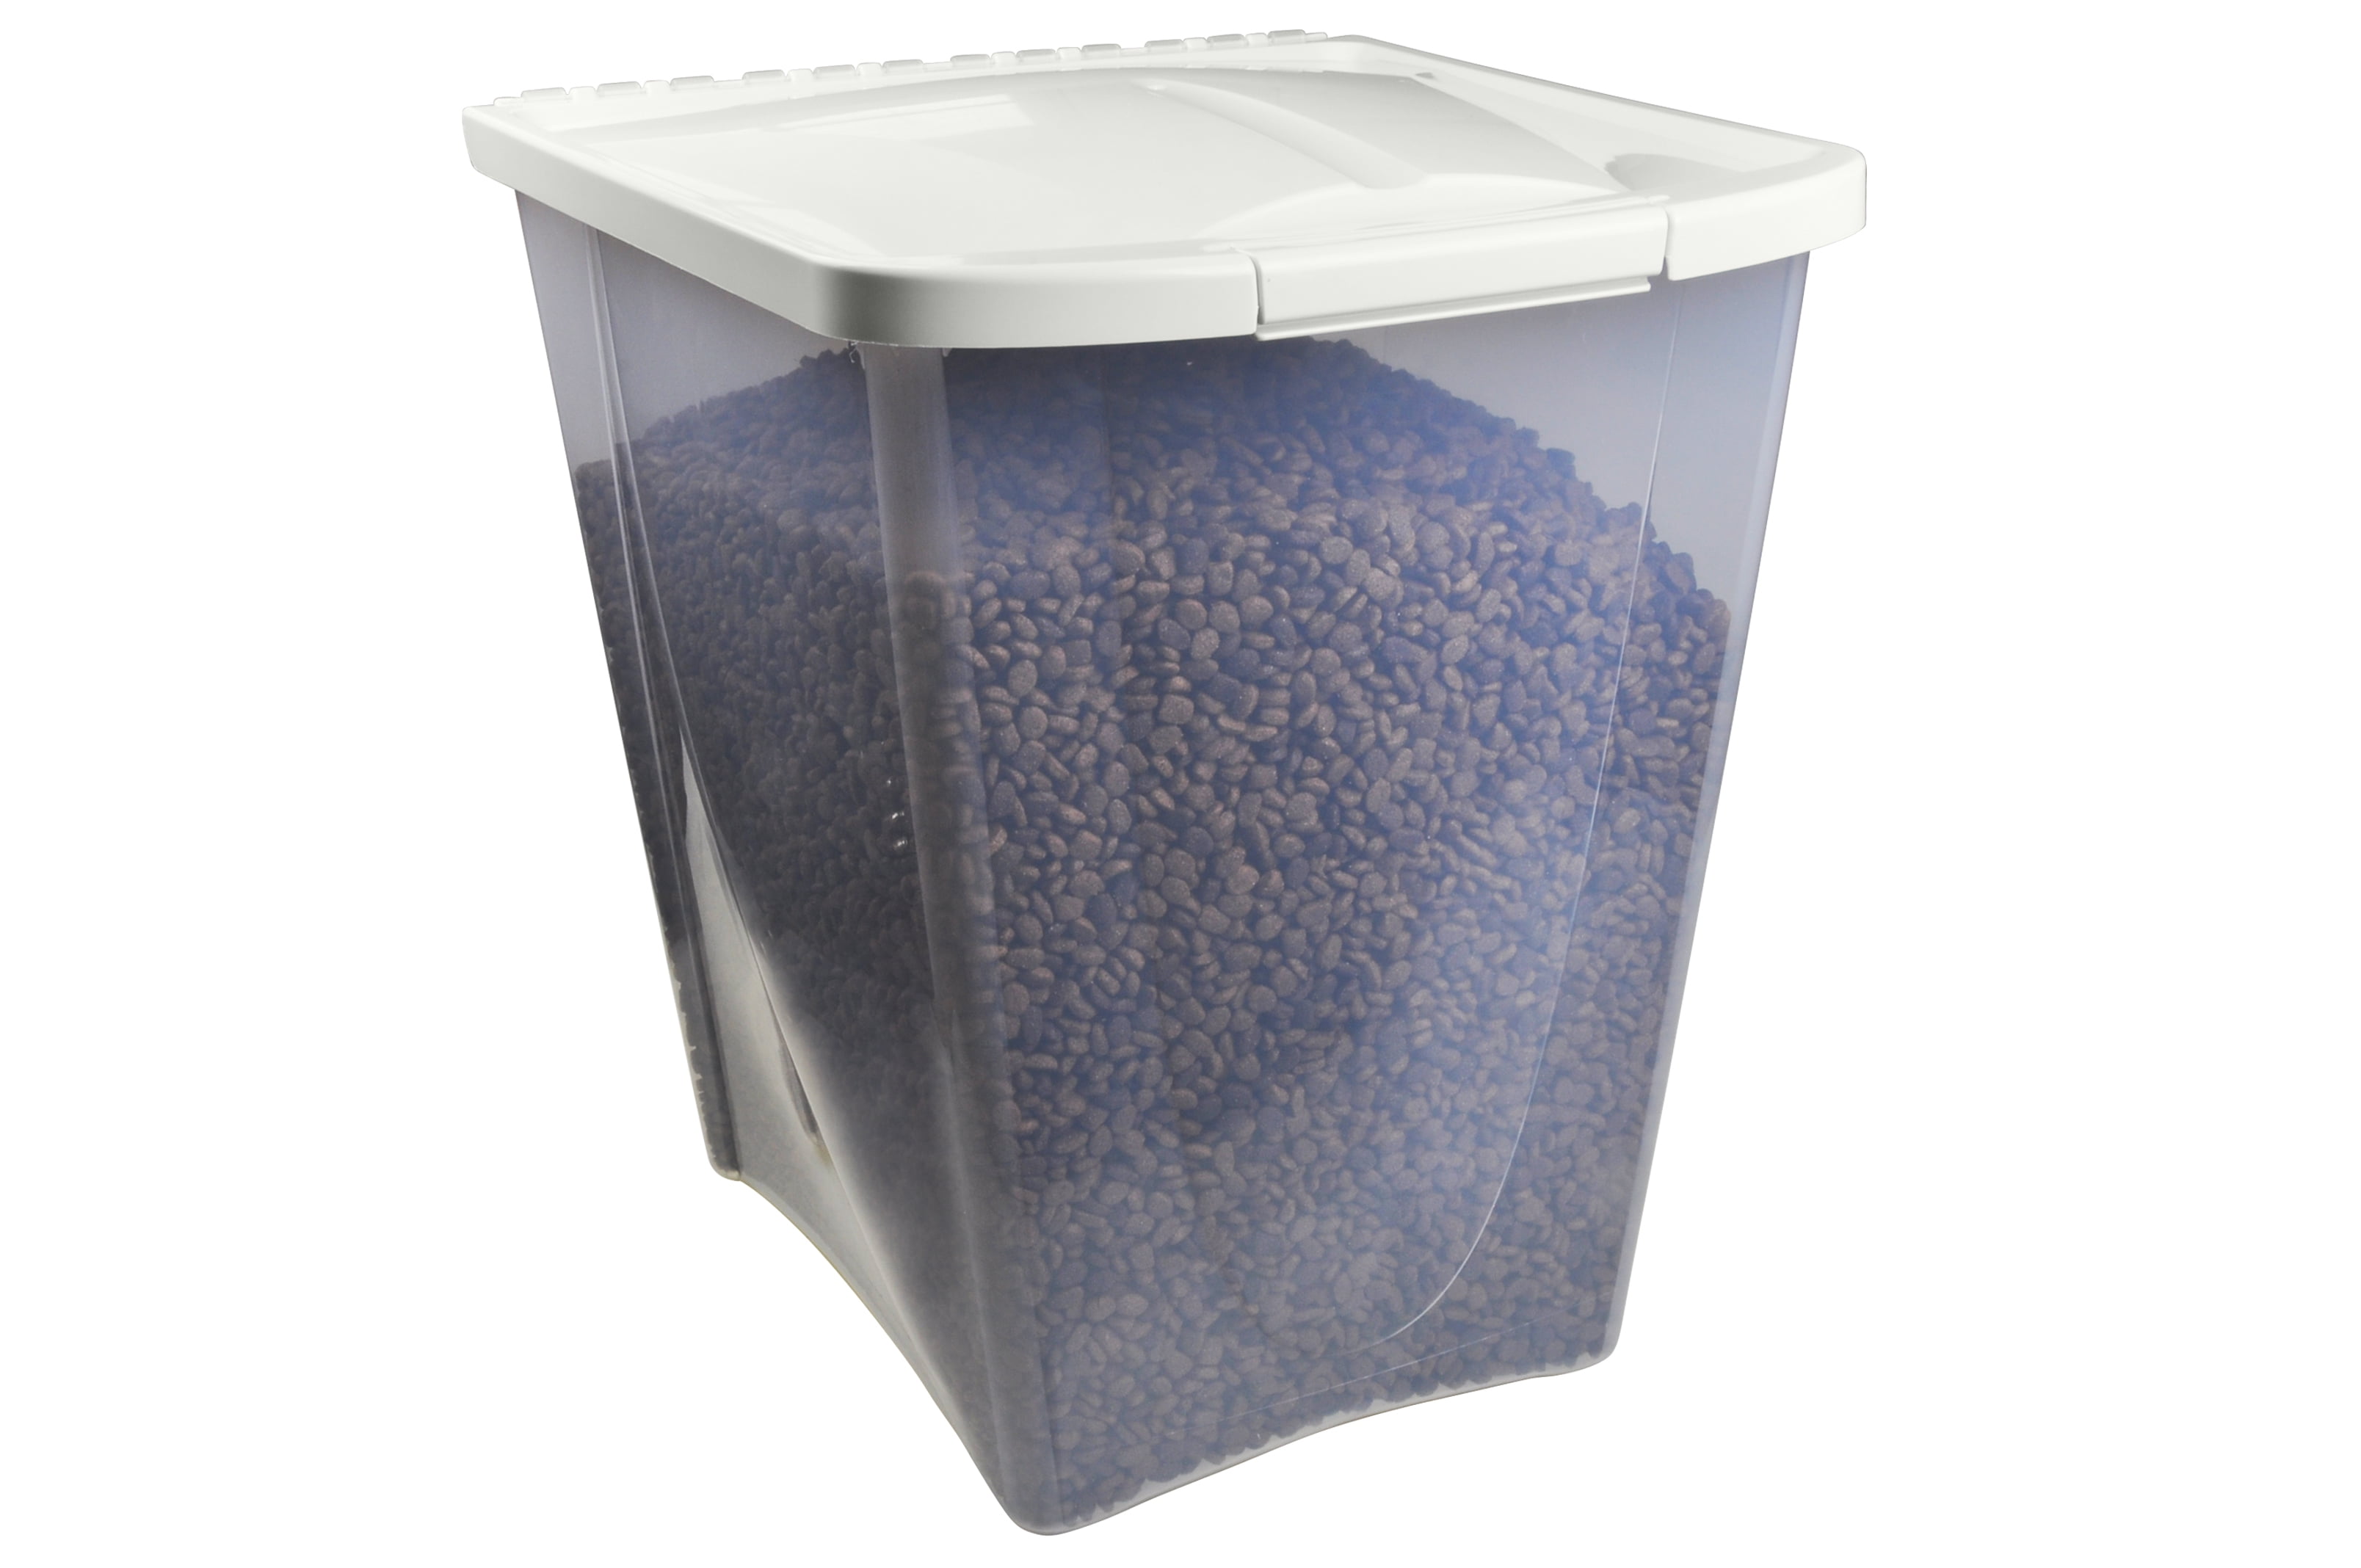 50 pound dog food container